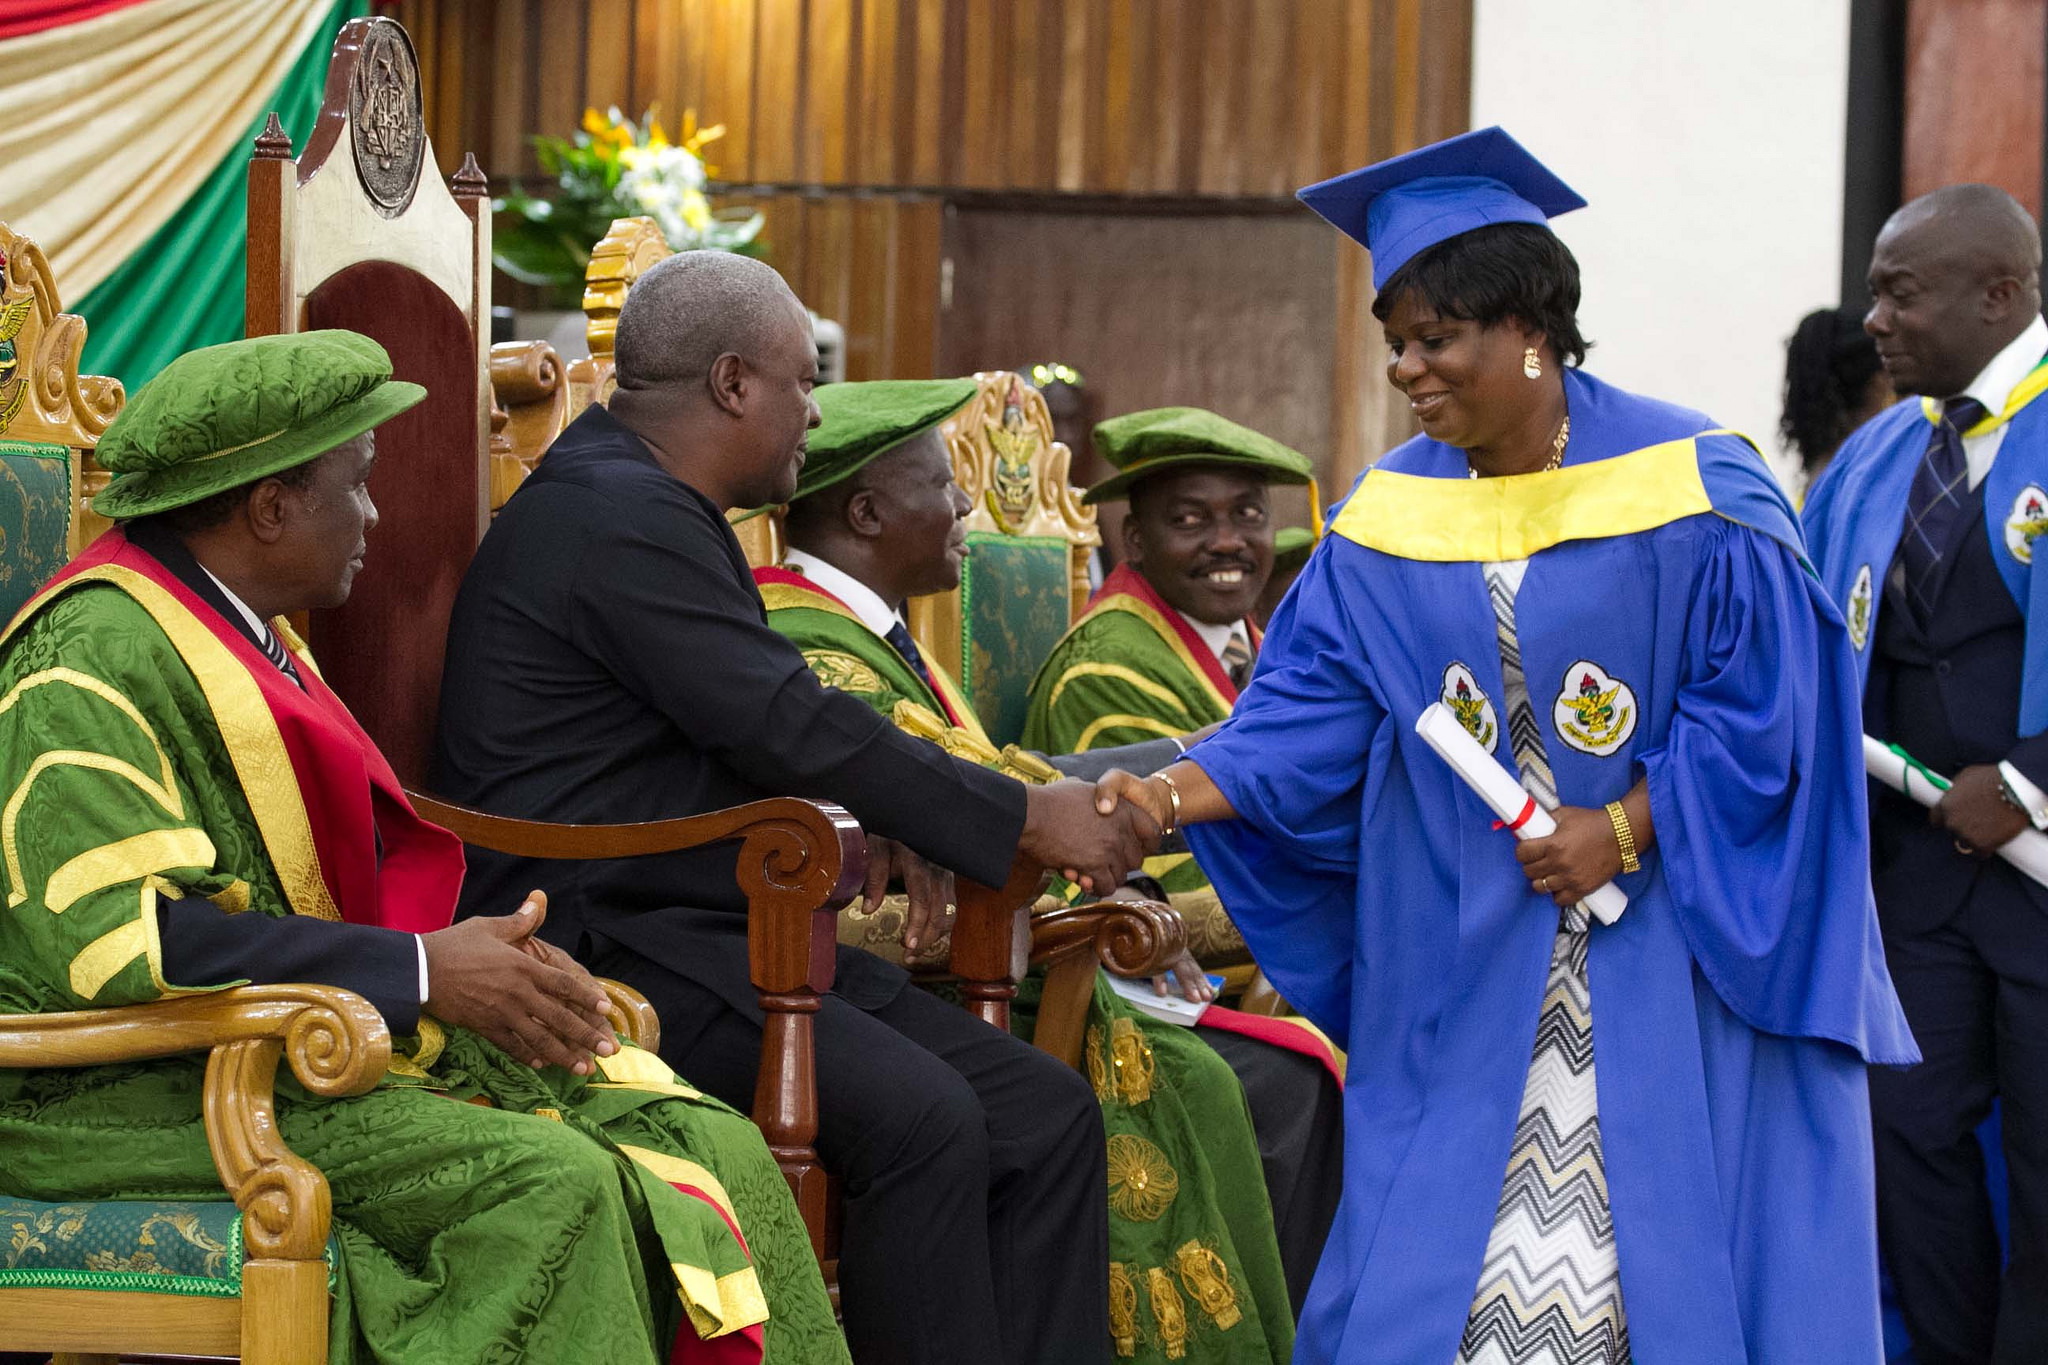 President Mahama congratulating one of the graduates at the 50th congregation of the KNUST in Kumasi